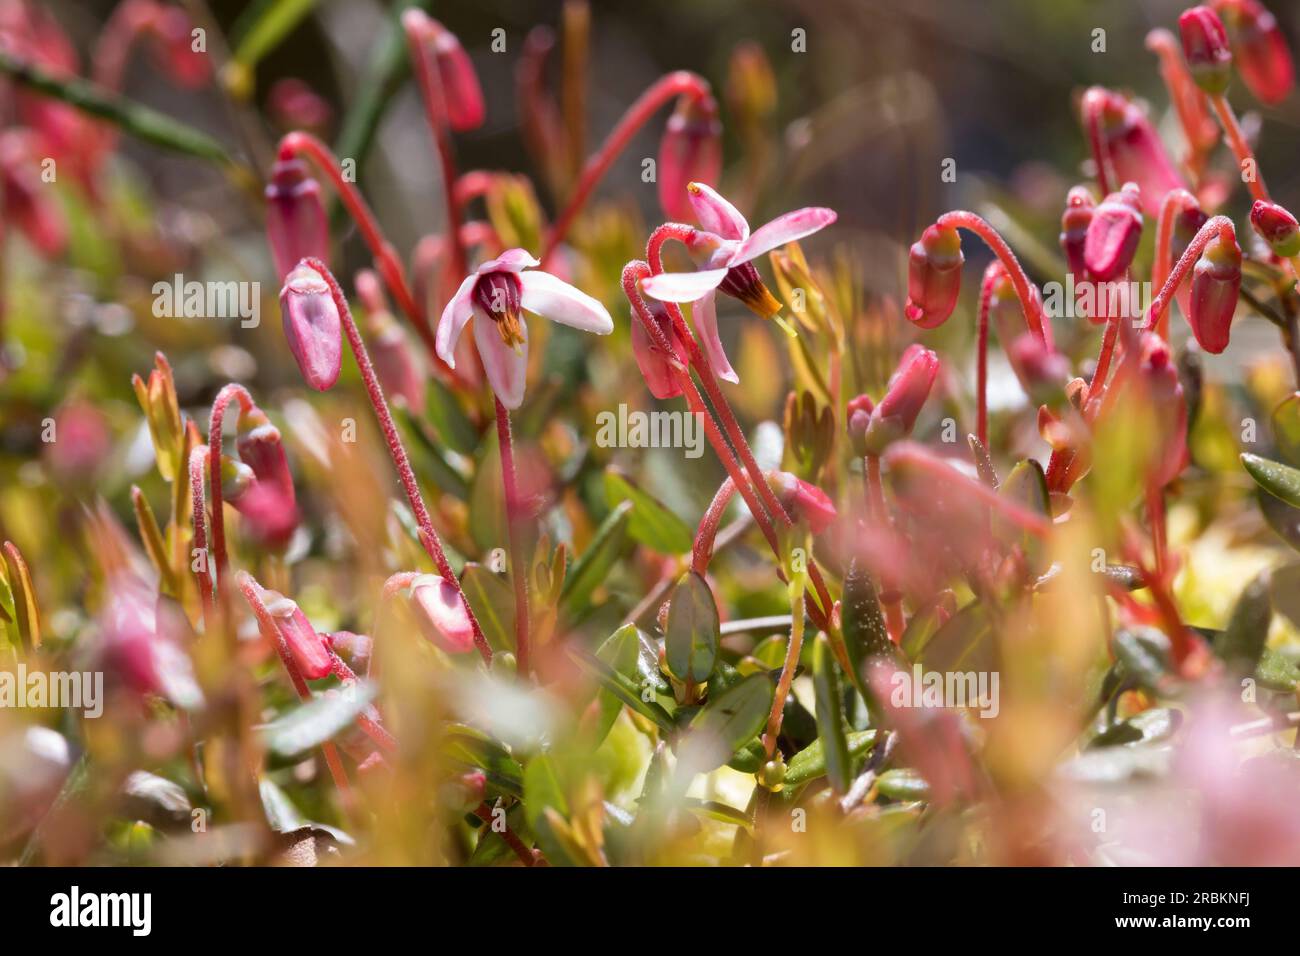 wild cranberry, bog cranberry, small cranberry, swamp cranberry (Vaccinium oxycoccos, Oxycoccus palustris), blooming, Sweden Stock Photo